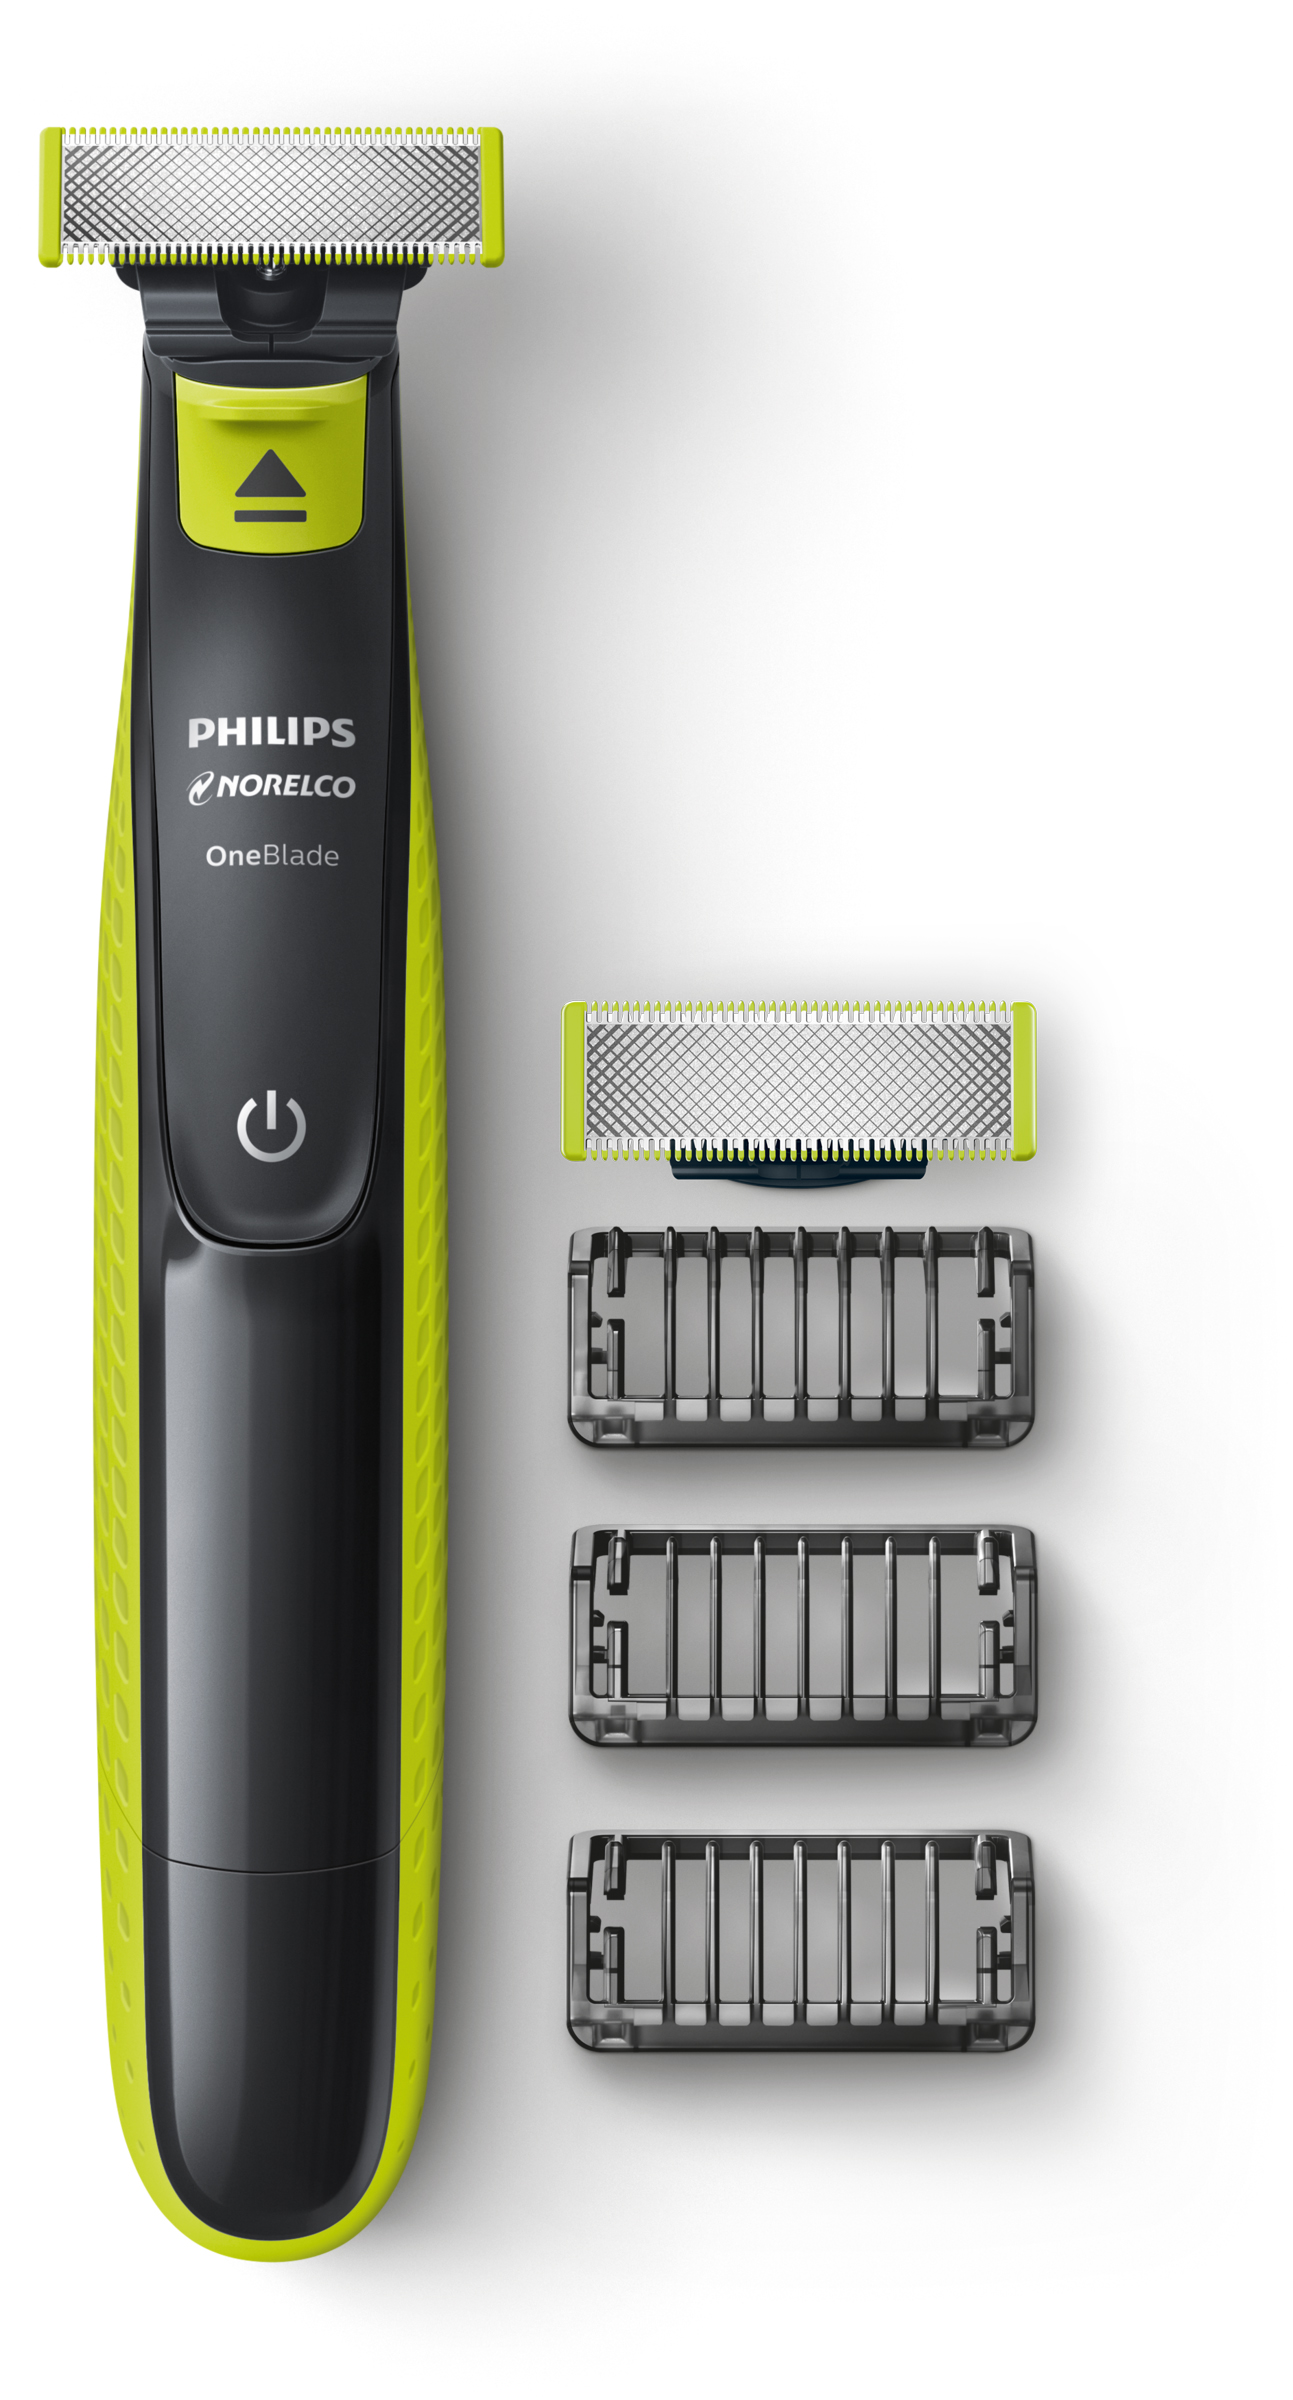 Philips Norelco Rebate Available Up To 15 OneBlade Bonus Pack With 